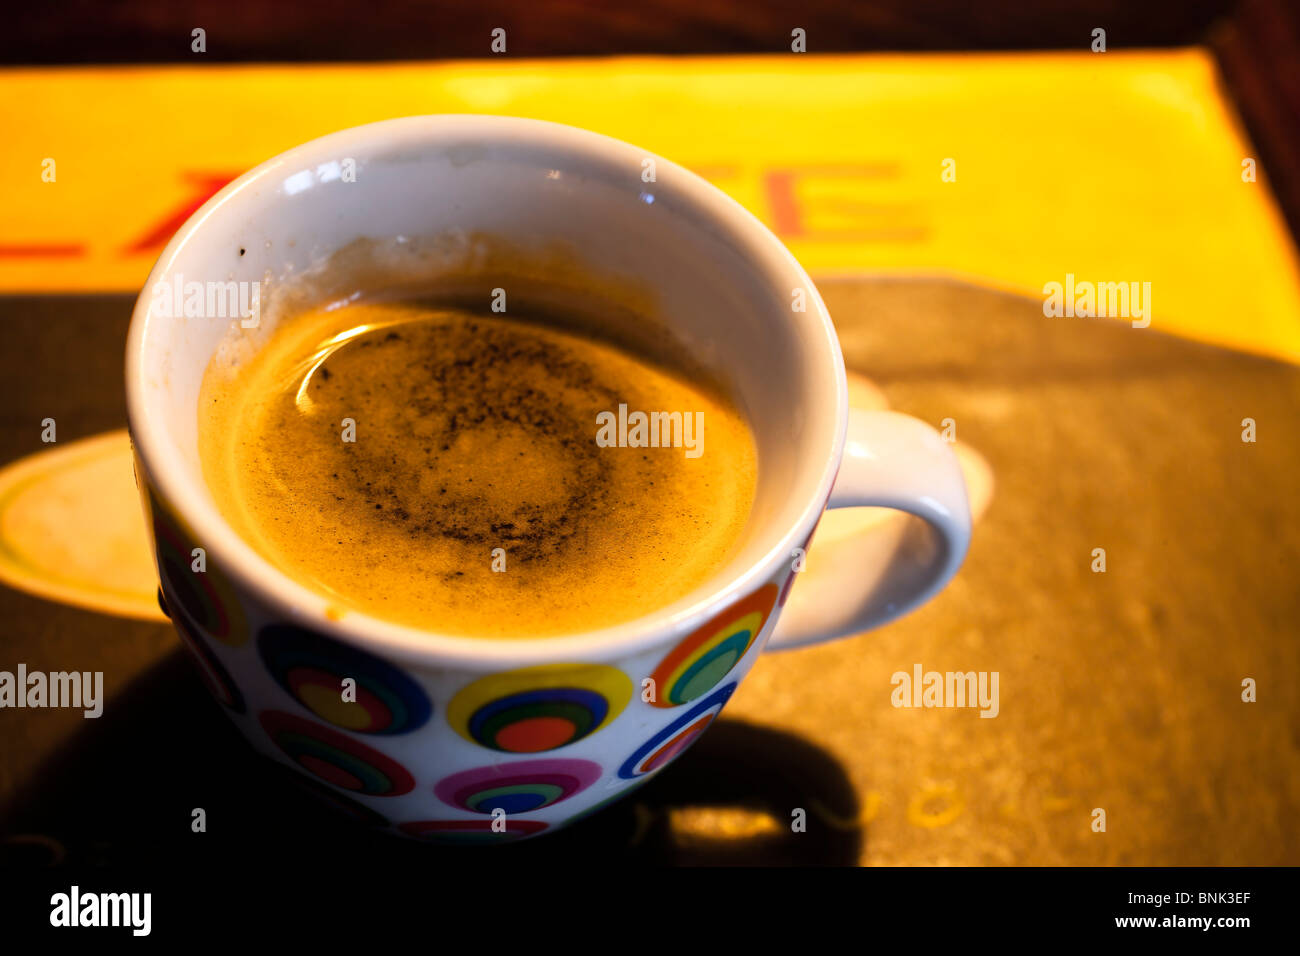 A CUP OF COFFEE espresso Stock Photo